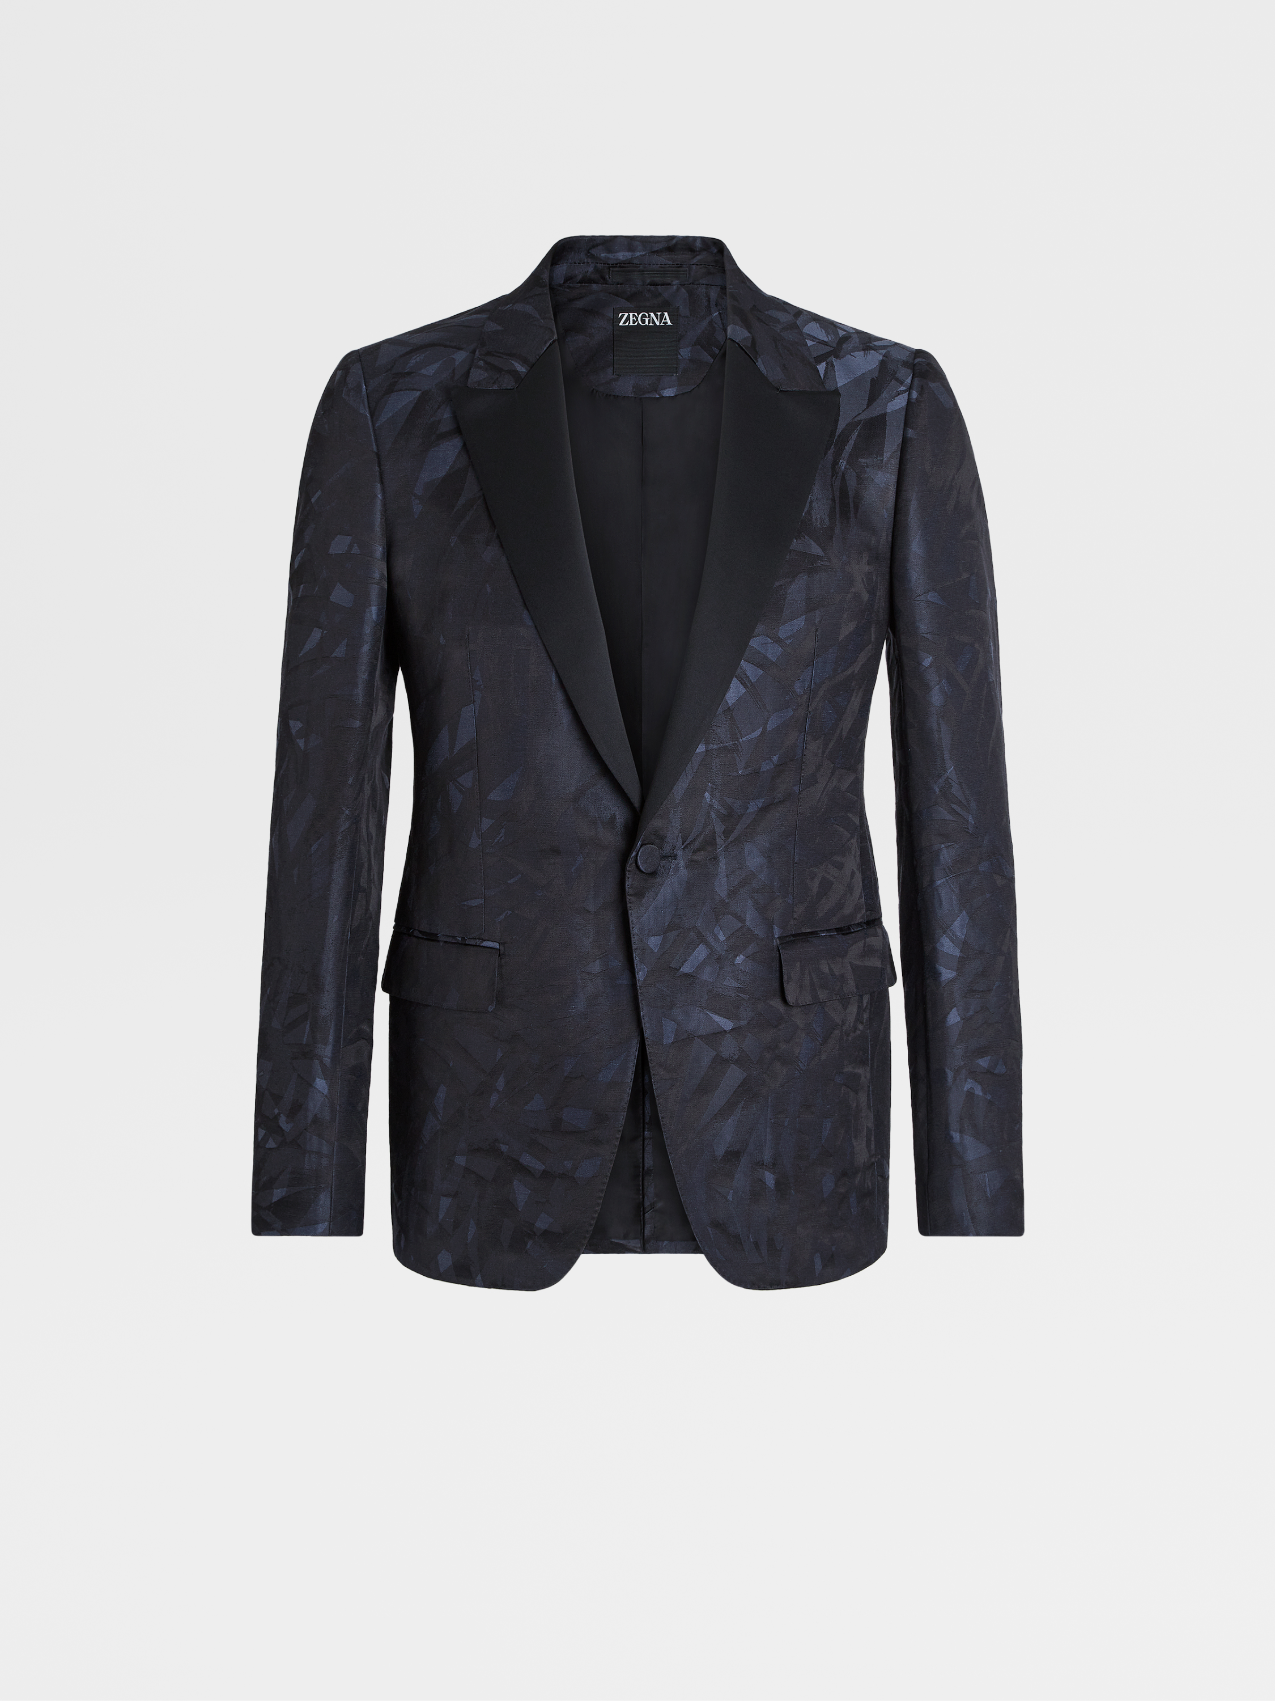 Blue and Black Jacquard Linen and Silk Evening Jacket